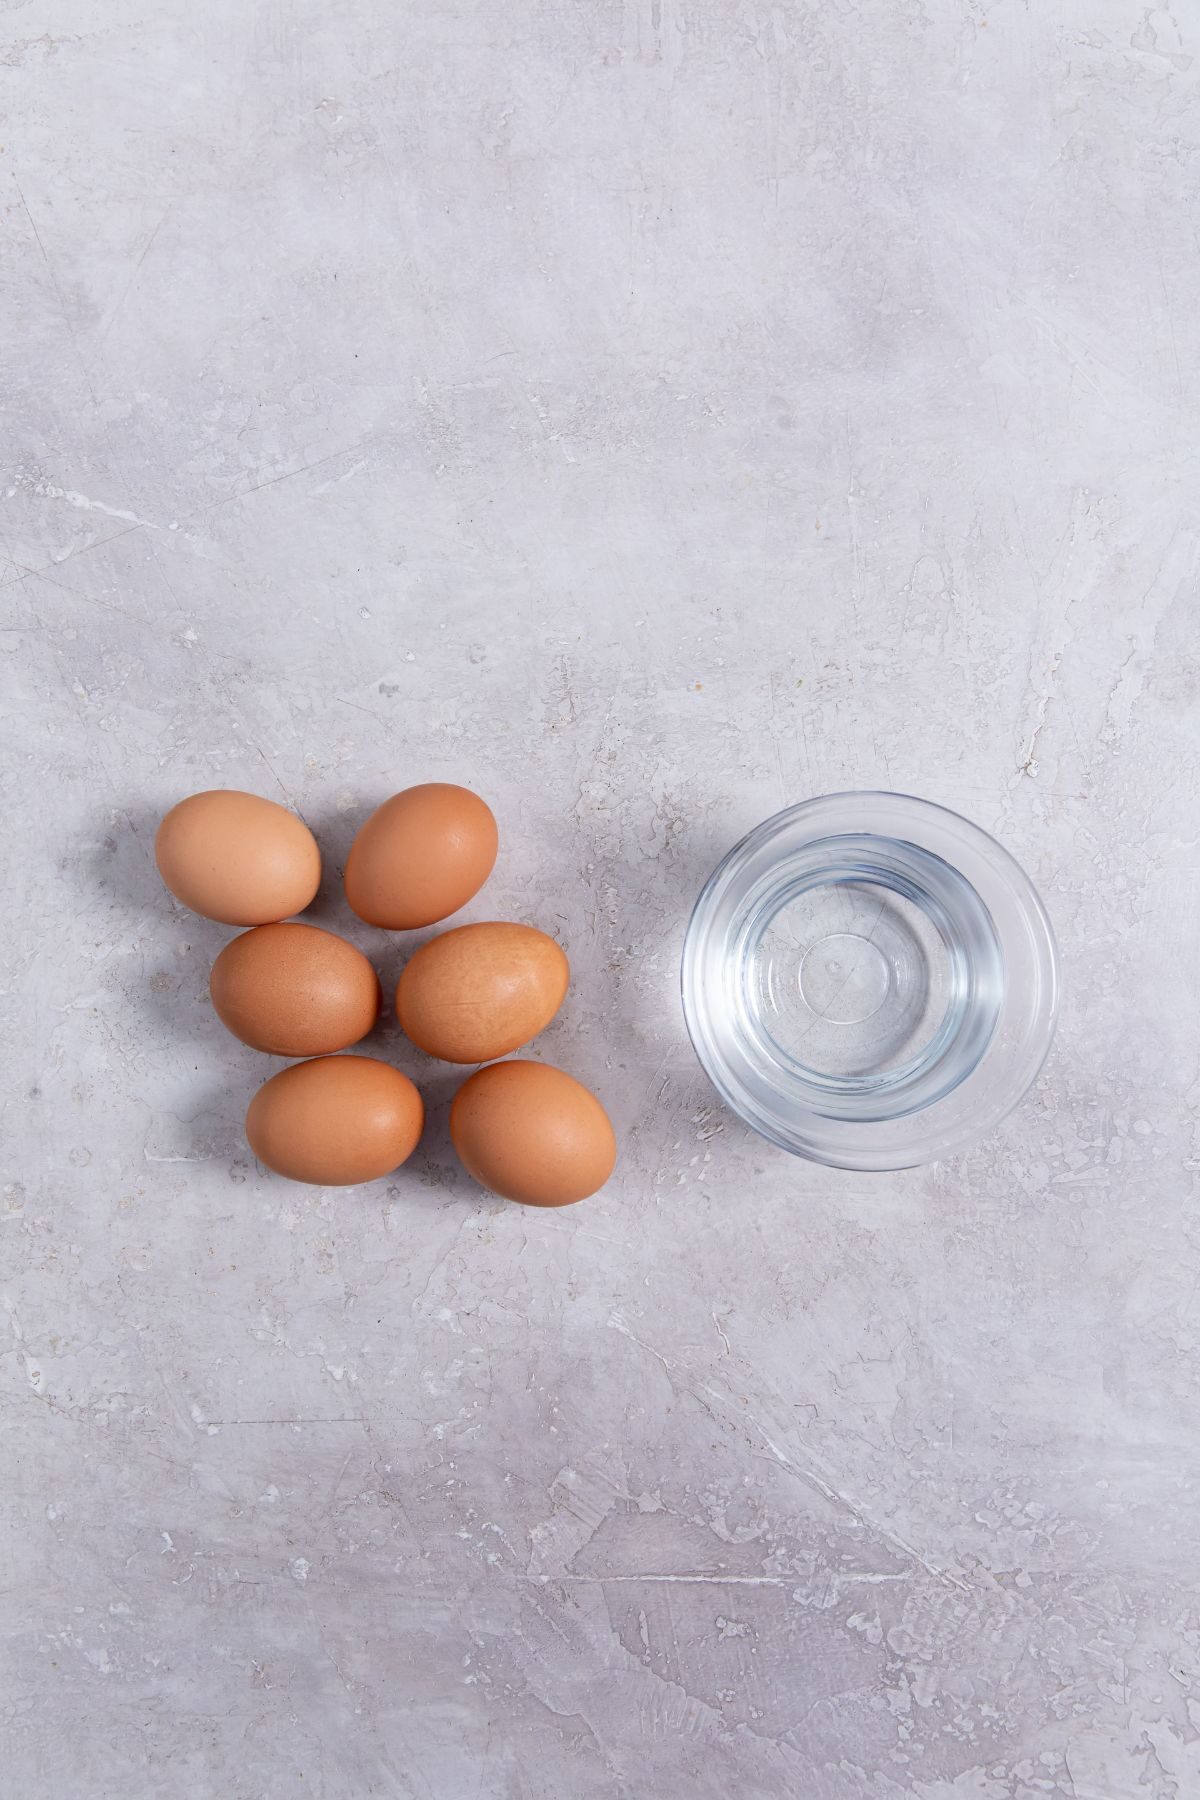 ingredients of eggs and water